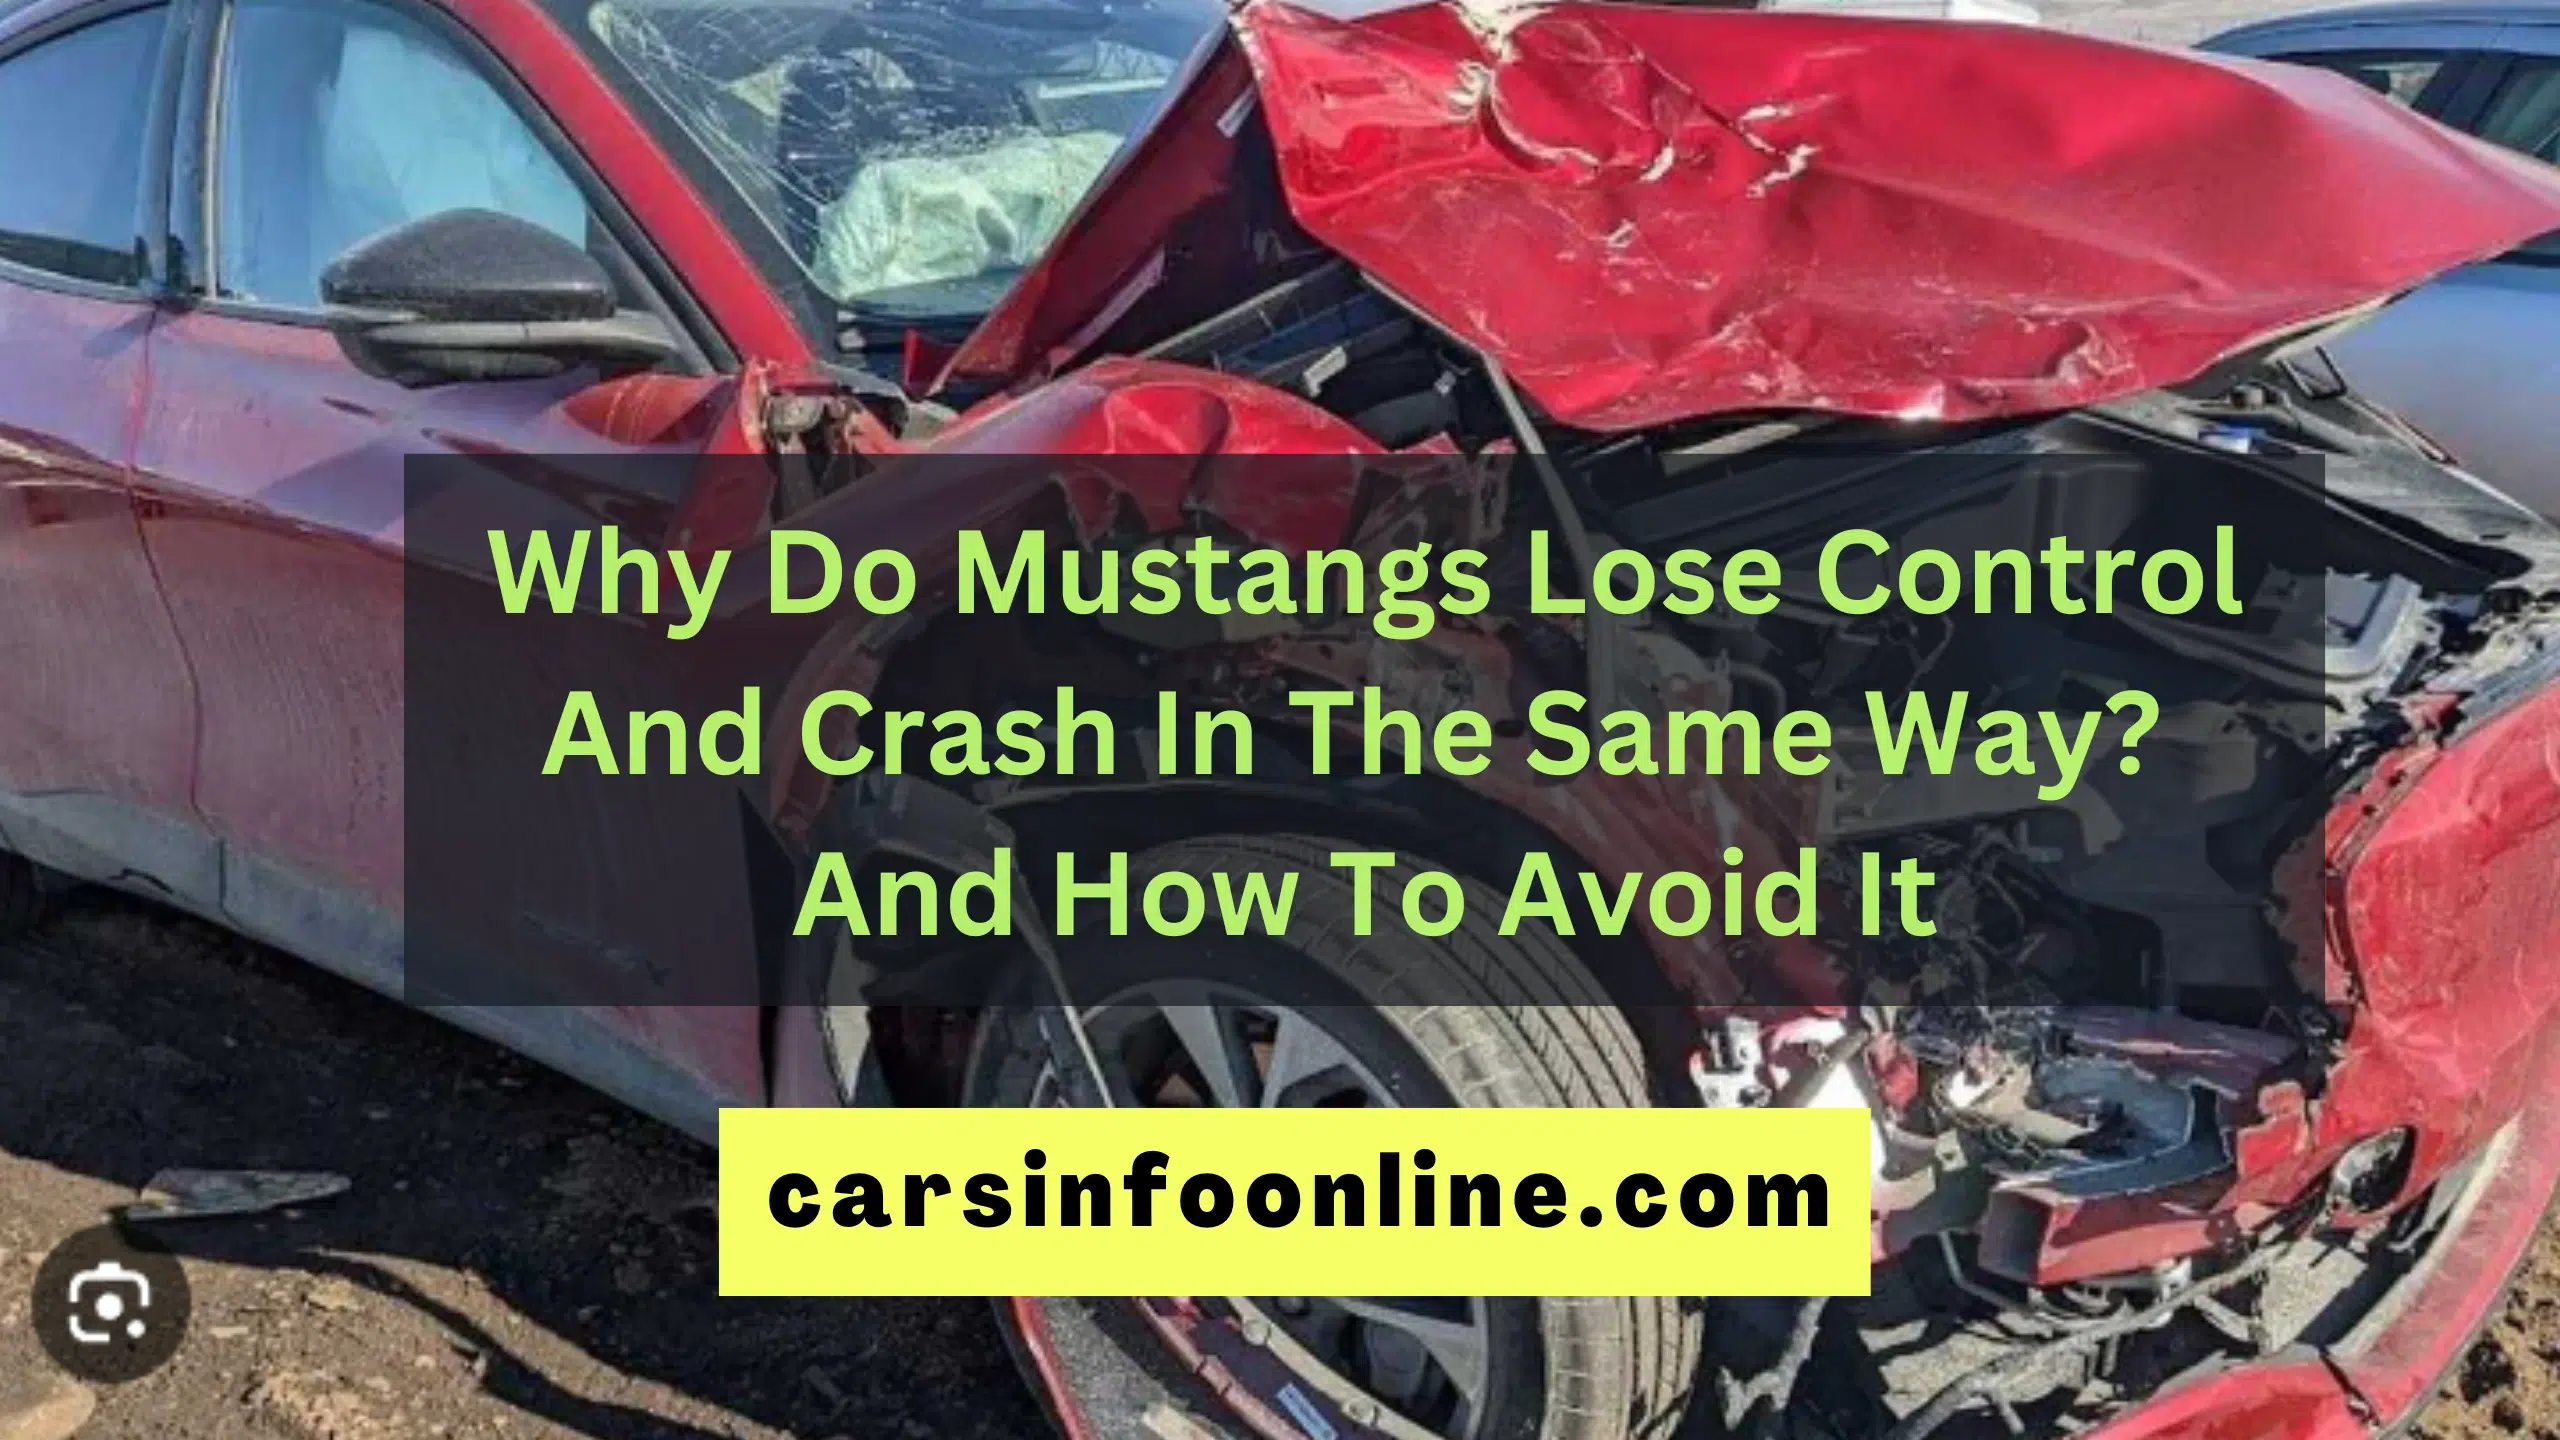 Why Do Mustangs Lose Control And Crash In The Same Way